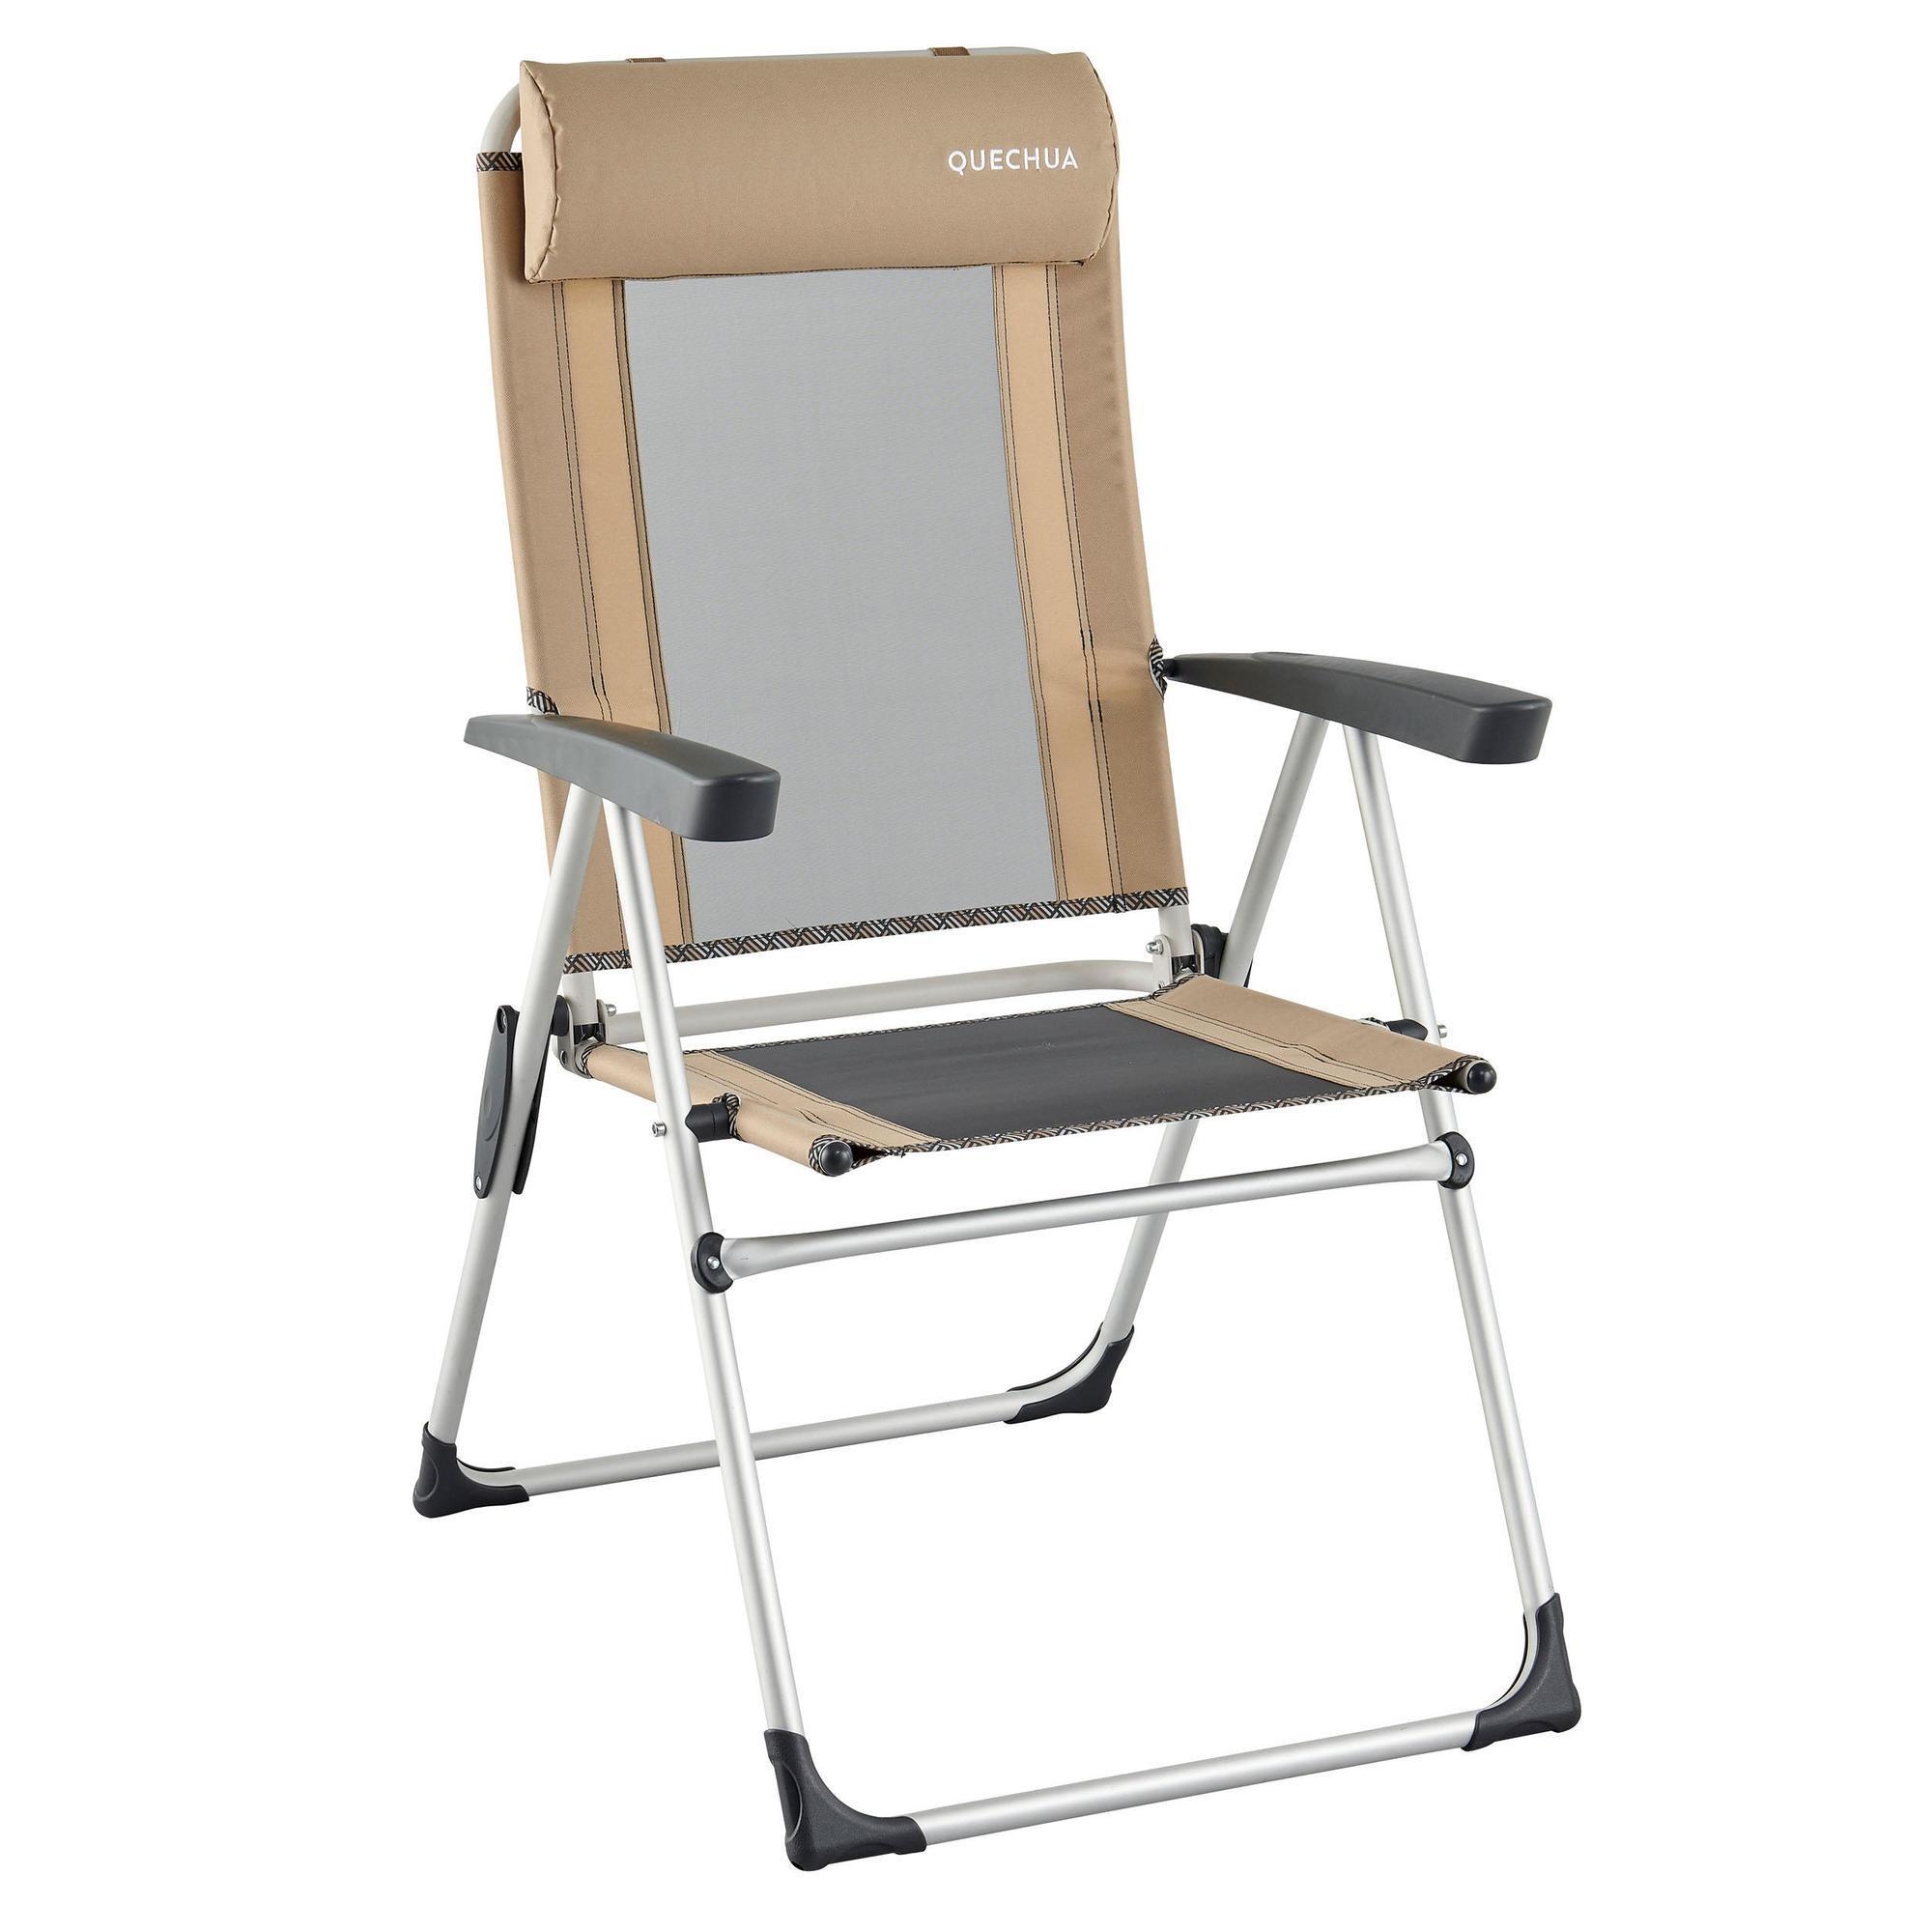 COMFORTABLE RECLINING CHAIR FOR CAMPING 